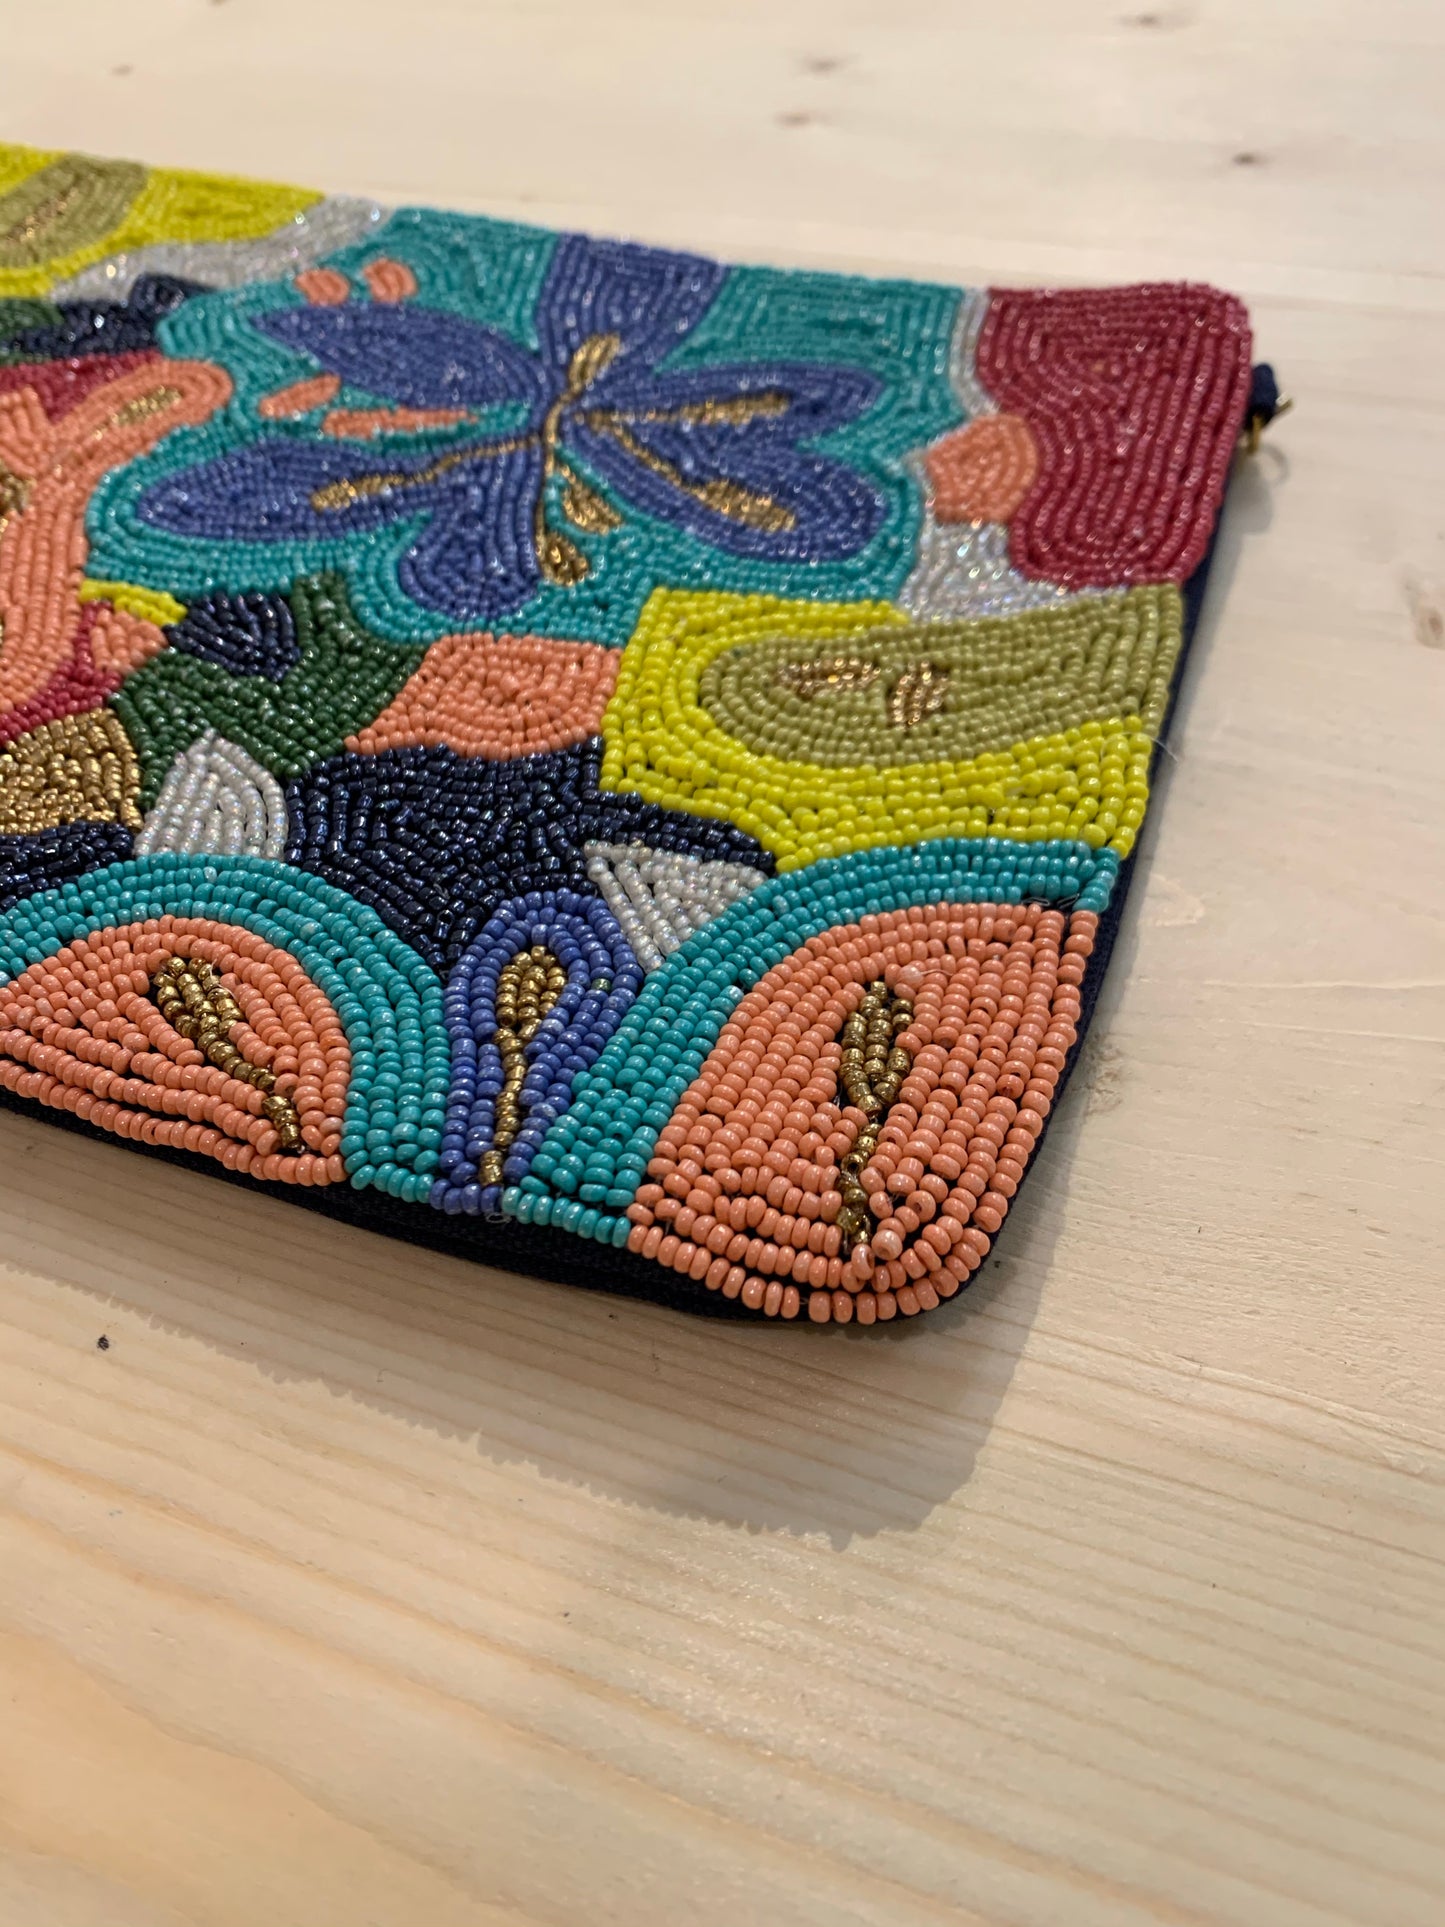 Hand Beaded Floral Clutch Purse - Turquoise, Peach, and Lime